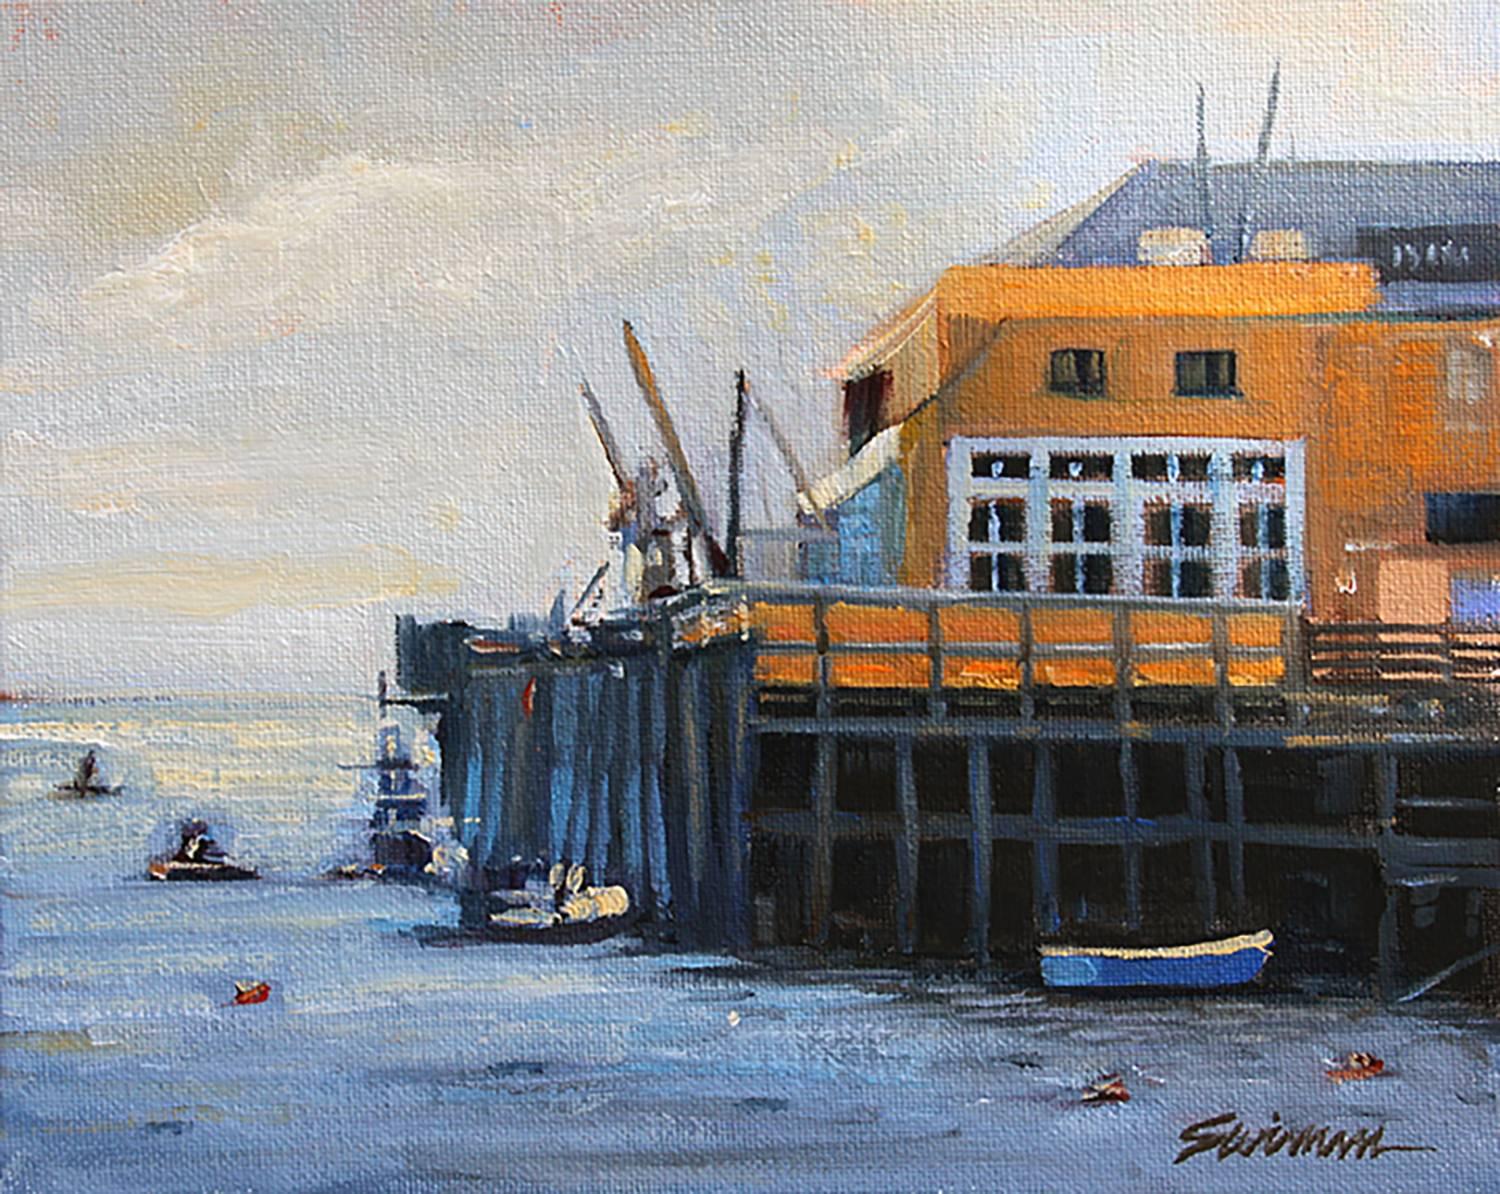  "San Luis Pier" features a unique perspective of a tranquil subject that exhibits the bold colors and strong composition that Swimm is known for.

  Born and raised on the East Coast, he had a successful career as an advertising commercial artist